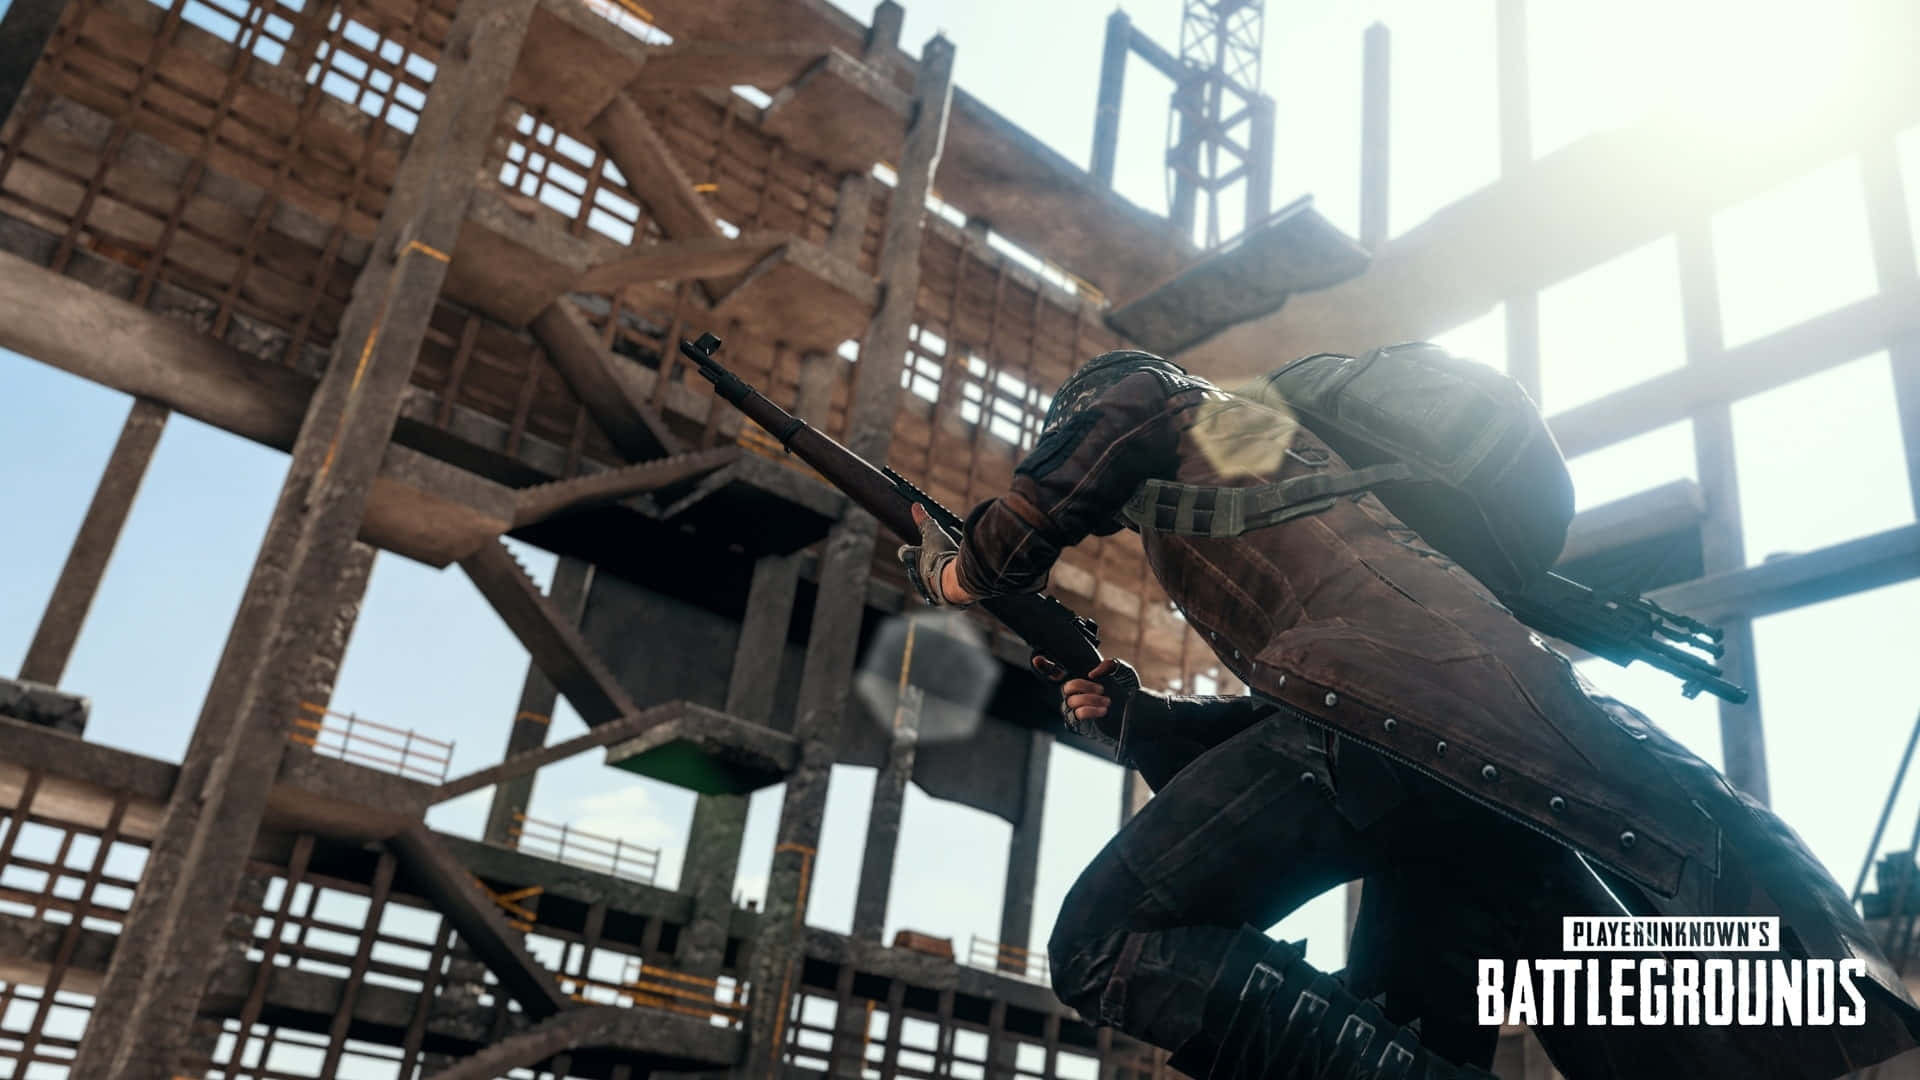 "The Ultimate Battle: Enjoy the Thrill of Playerunknown's Battlegrounds"